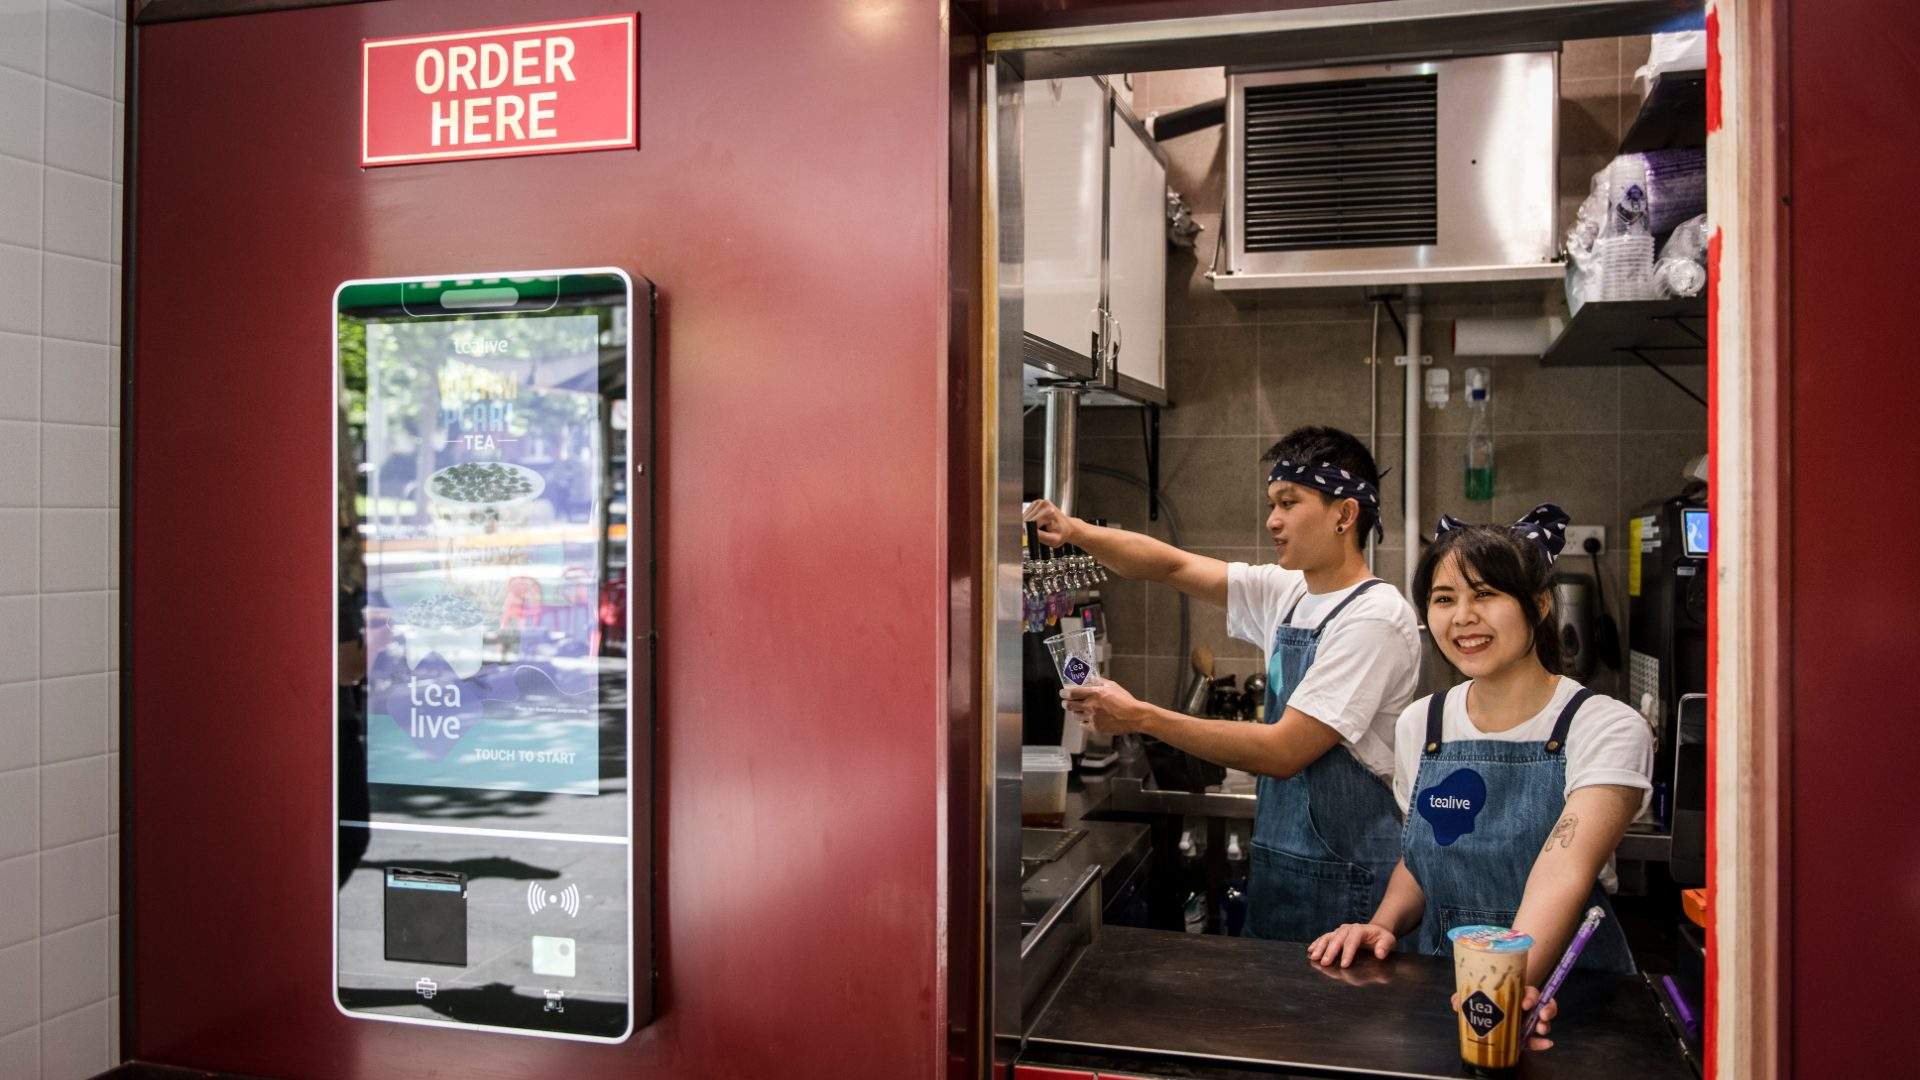 A Tiny New Bubble Tea Shop Has Opened Inside an Old ATM on Swanston Street